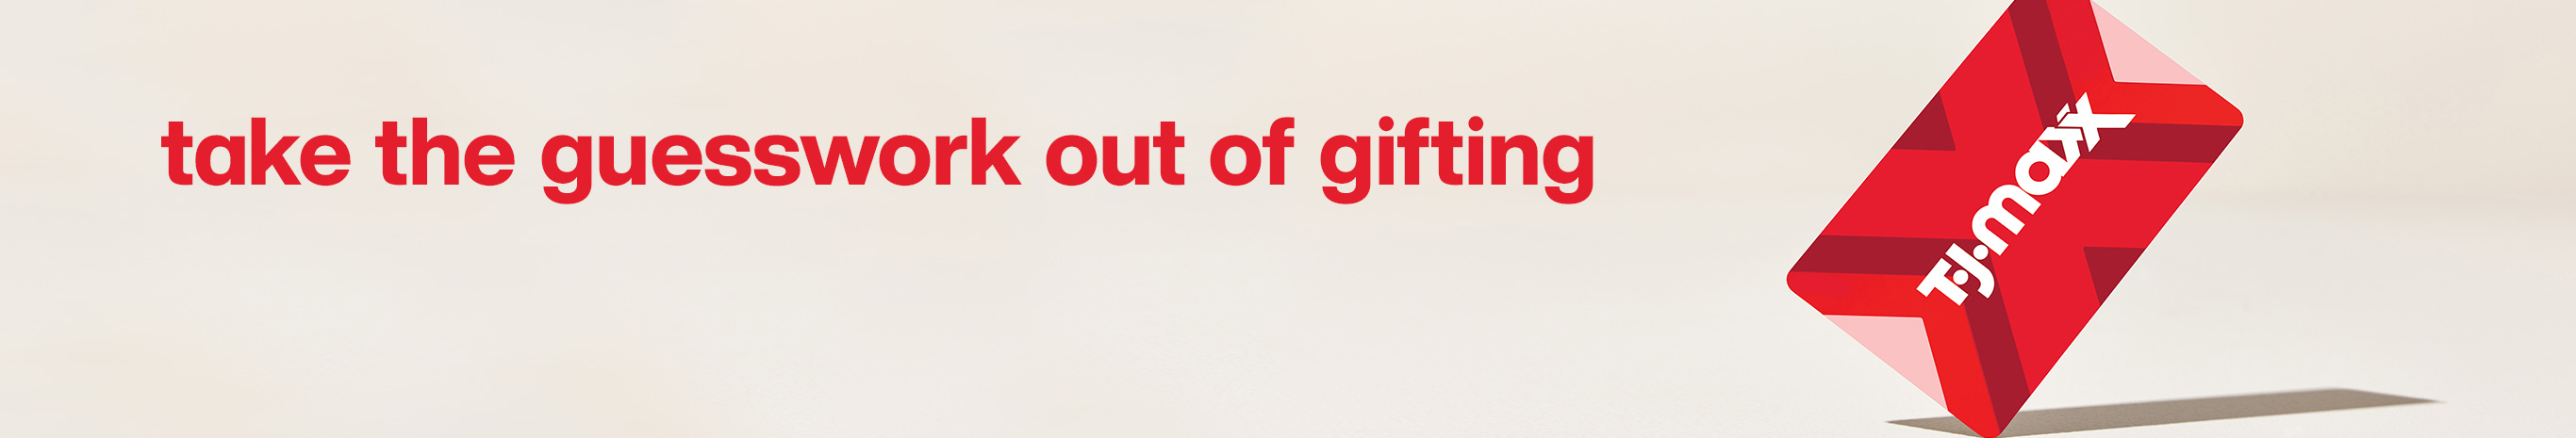 Take the guess work out of gifting